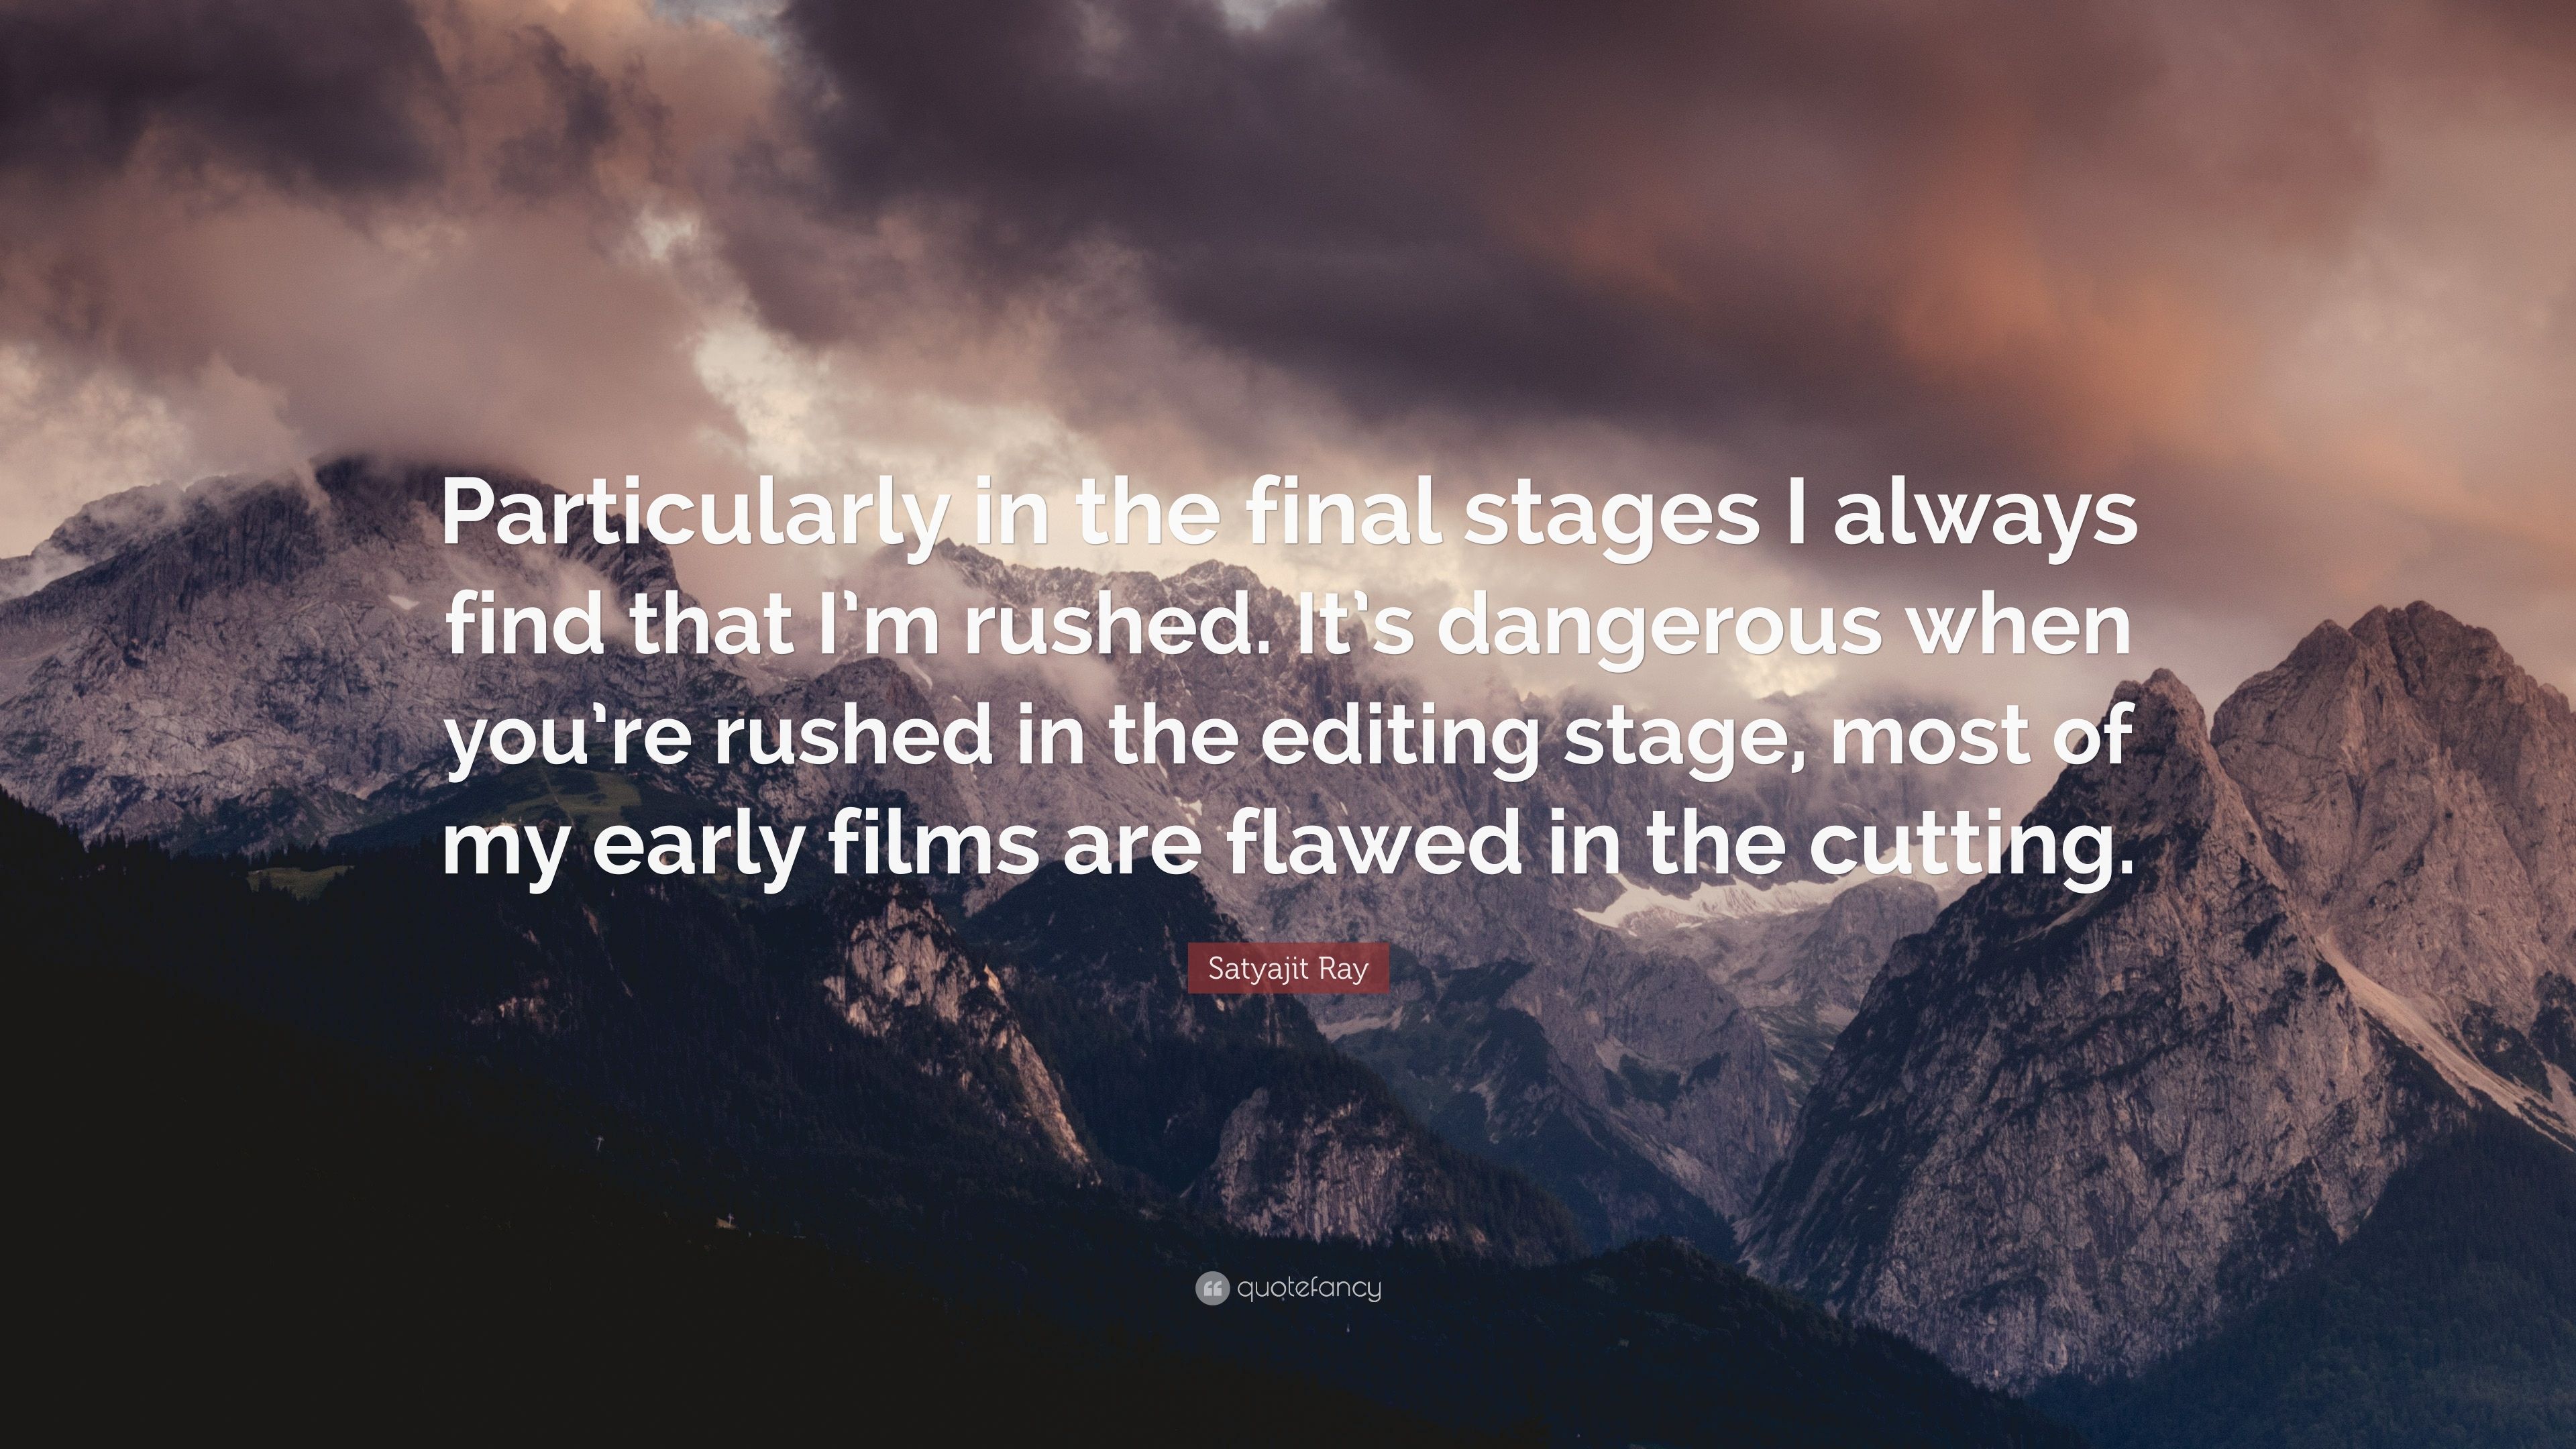 Satyajit Ray Quote: “Particularly in the final stages I always